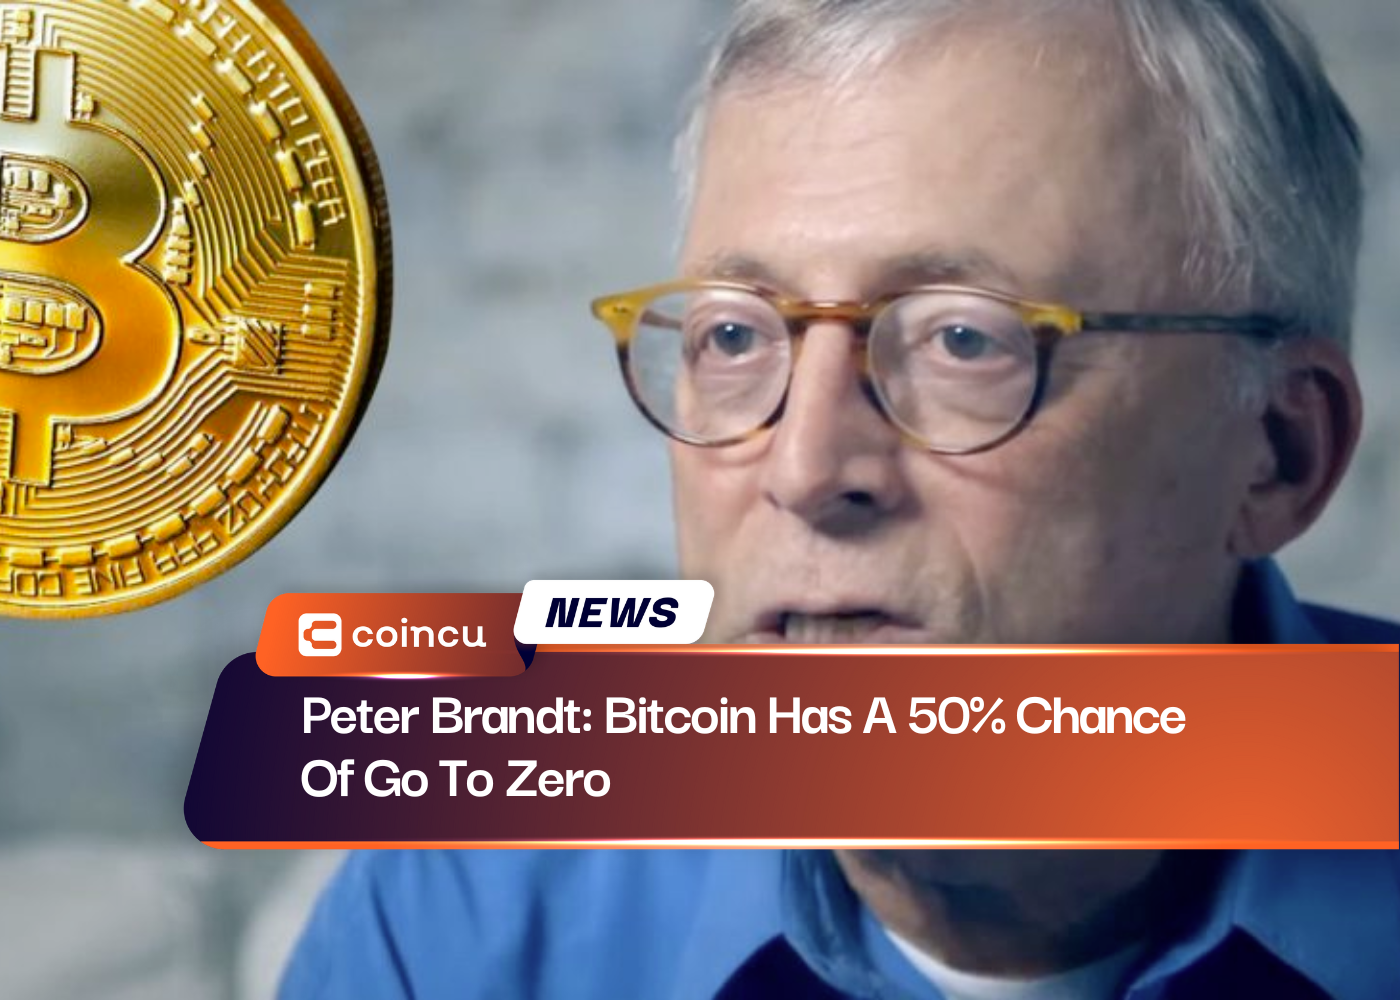 Peter Brandt: Bitcoin Has A 50% Chance Of Go To Zero